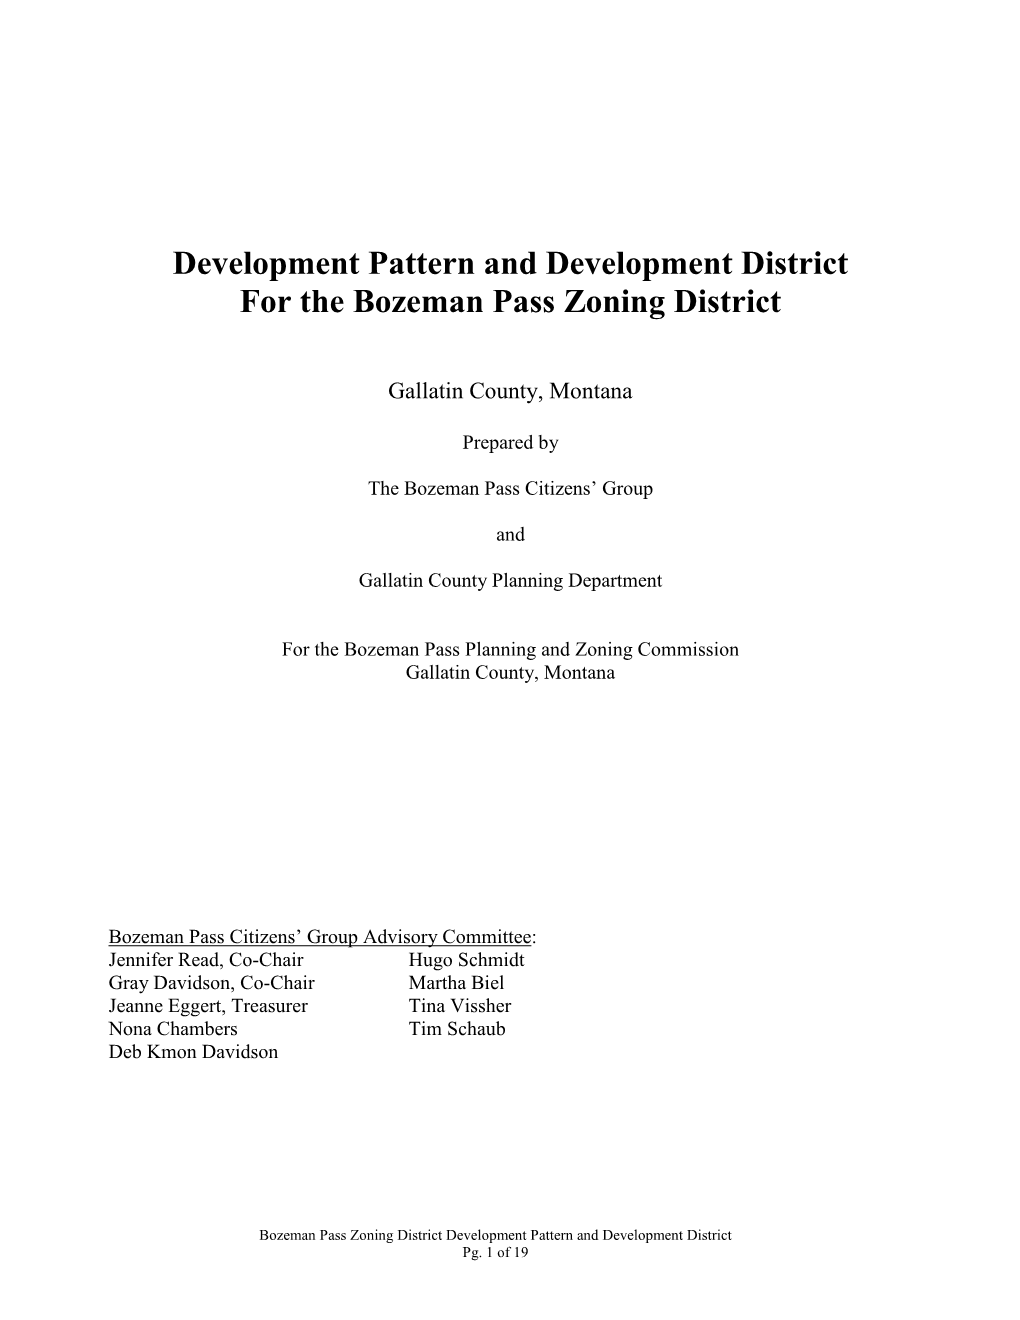 Development Pattern and Development District for the Bozeman Pass Zoning District